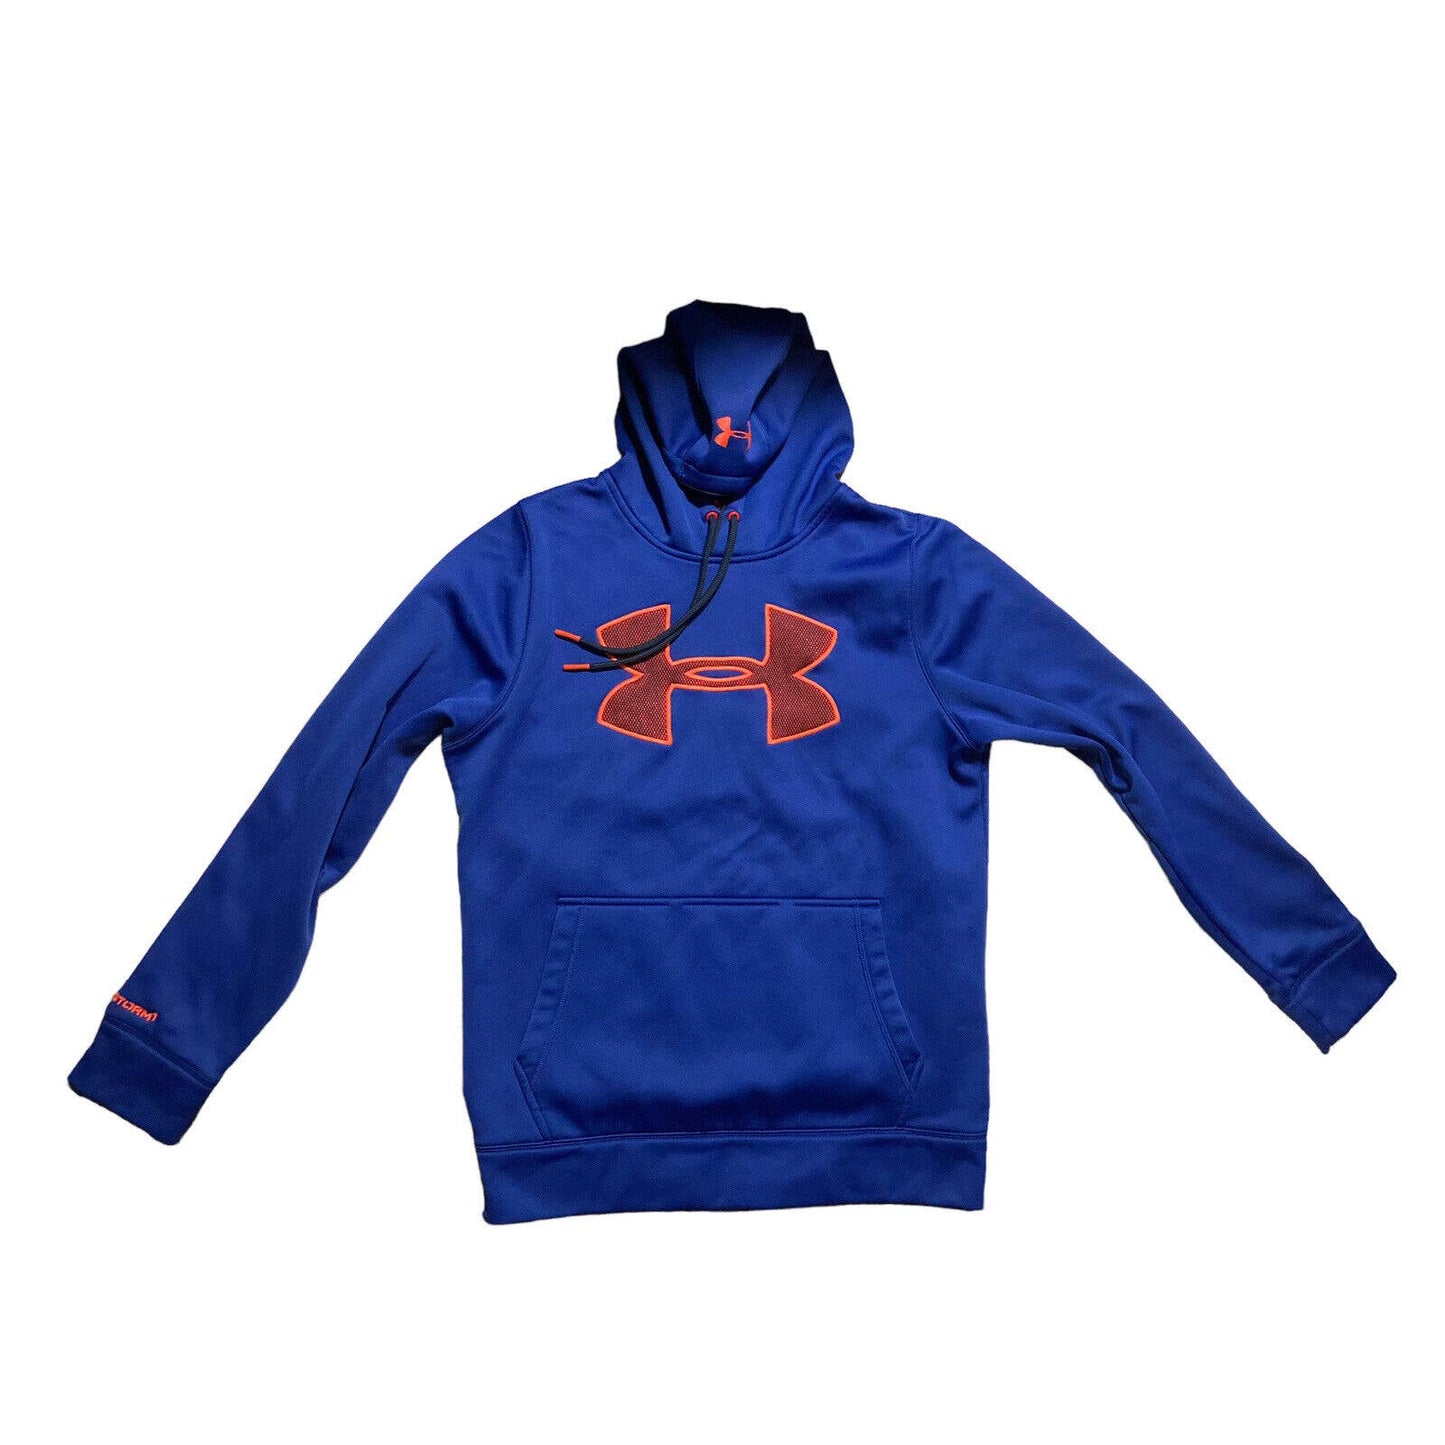 Under Armour Men's Storm Fleece Solid Logo Pullover Hoodie Blue Small 1259632